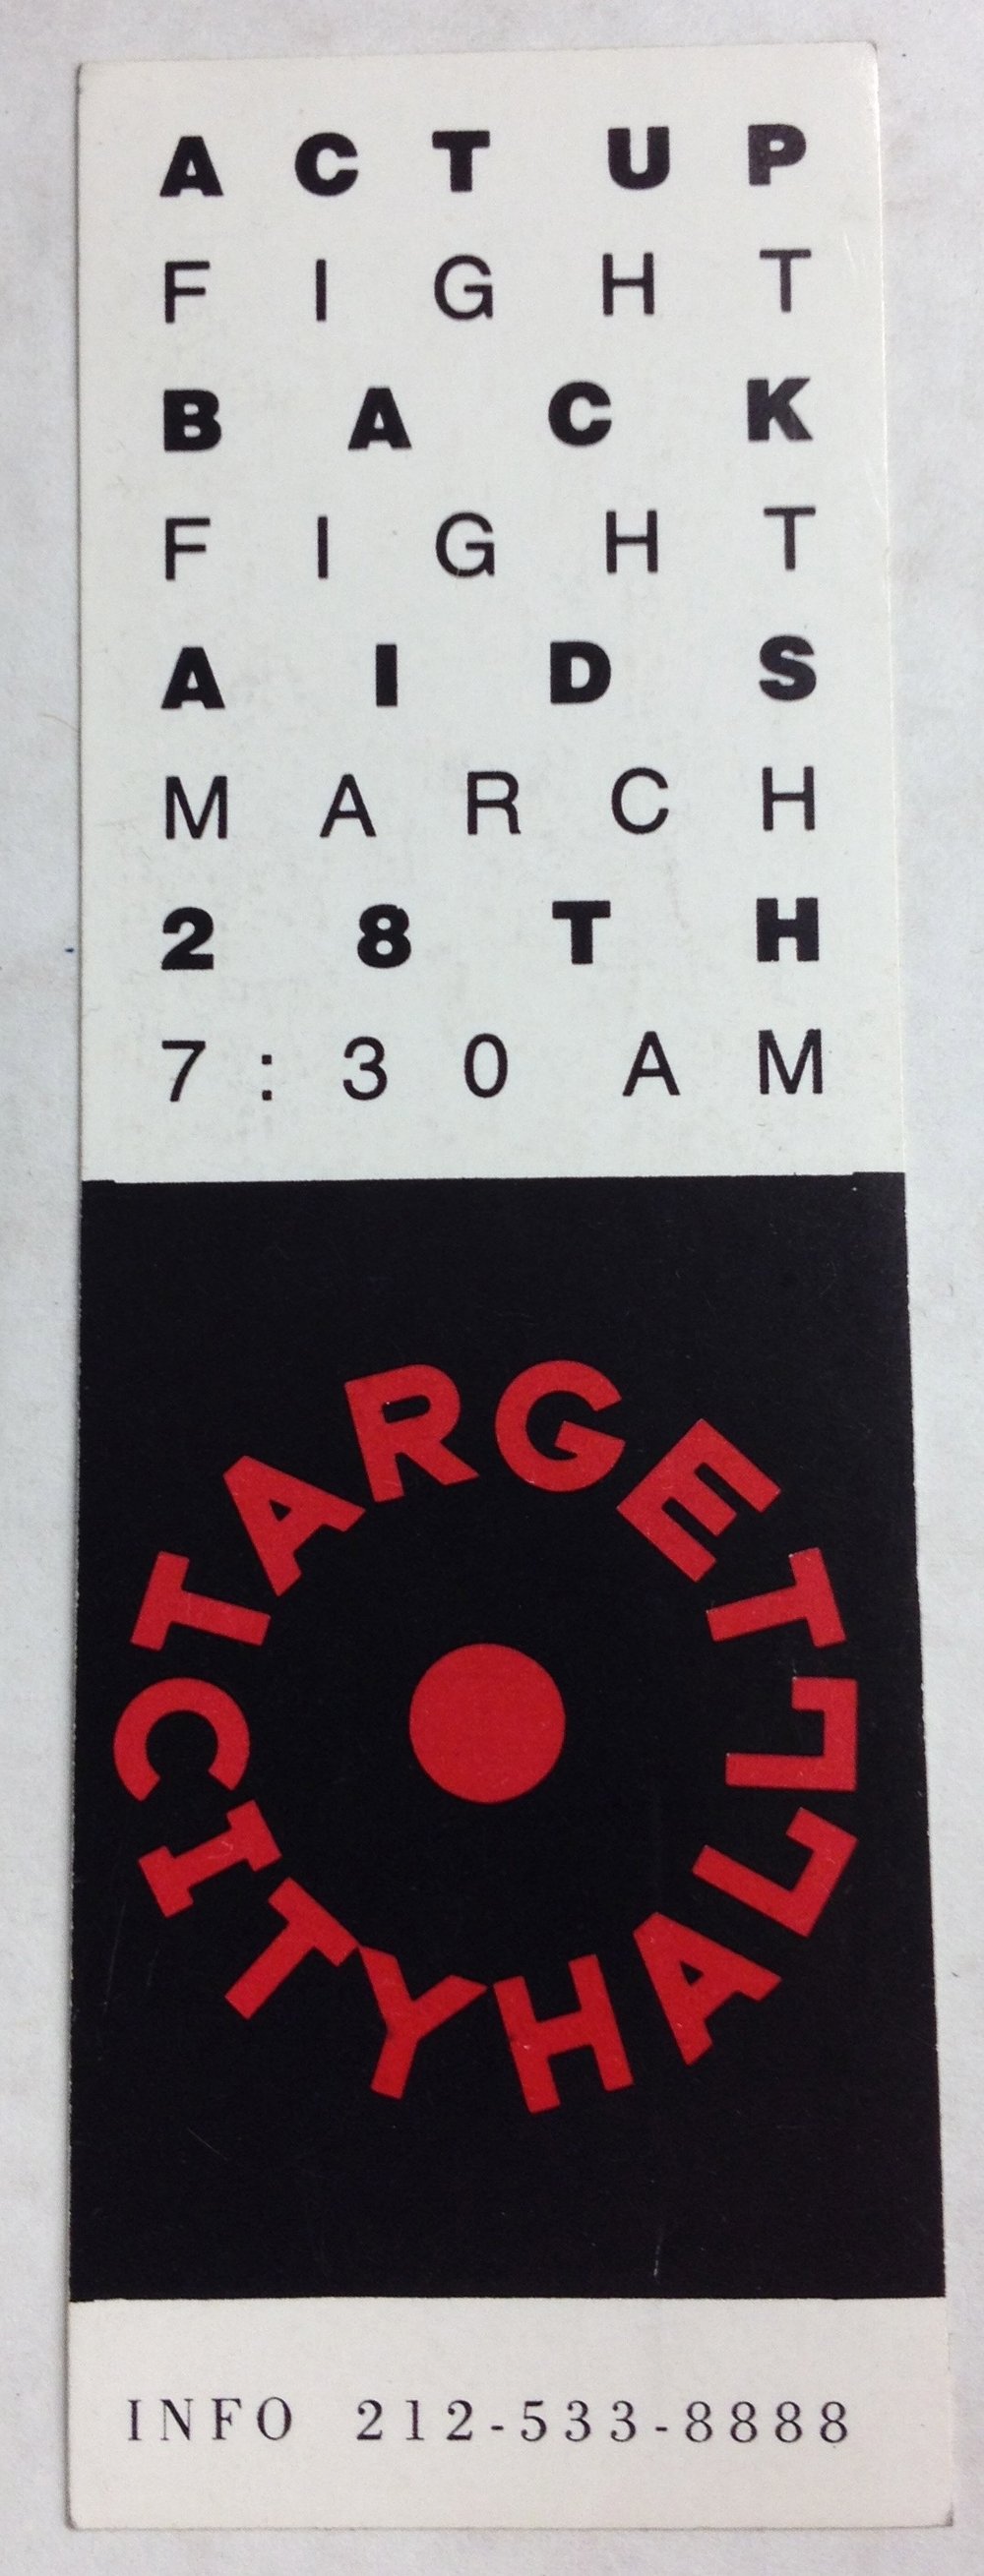 Target City Hall crack-and-peel sticker for ACT UP action on March 28, 1989.